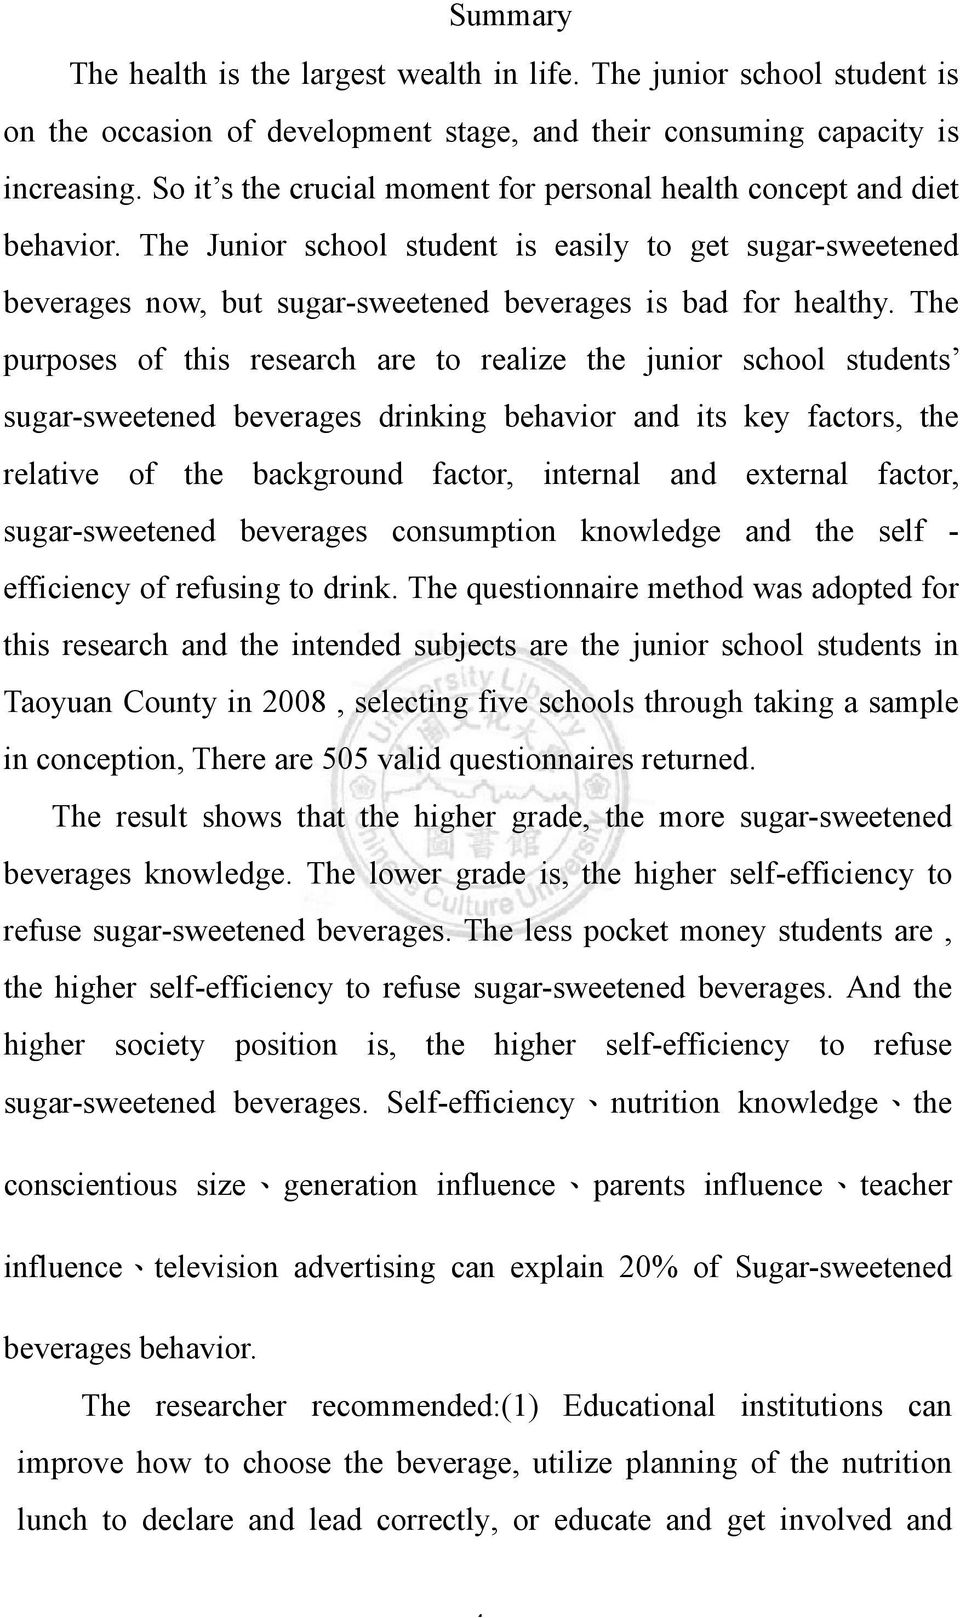 The purposes of this research are to realize the junior school students sugar-sweetened beverages drinking behavior and its key factors, the relative of the background factor, internal and external